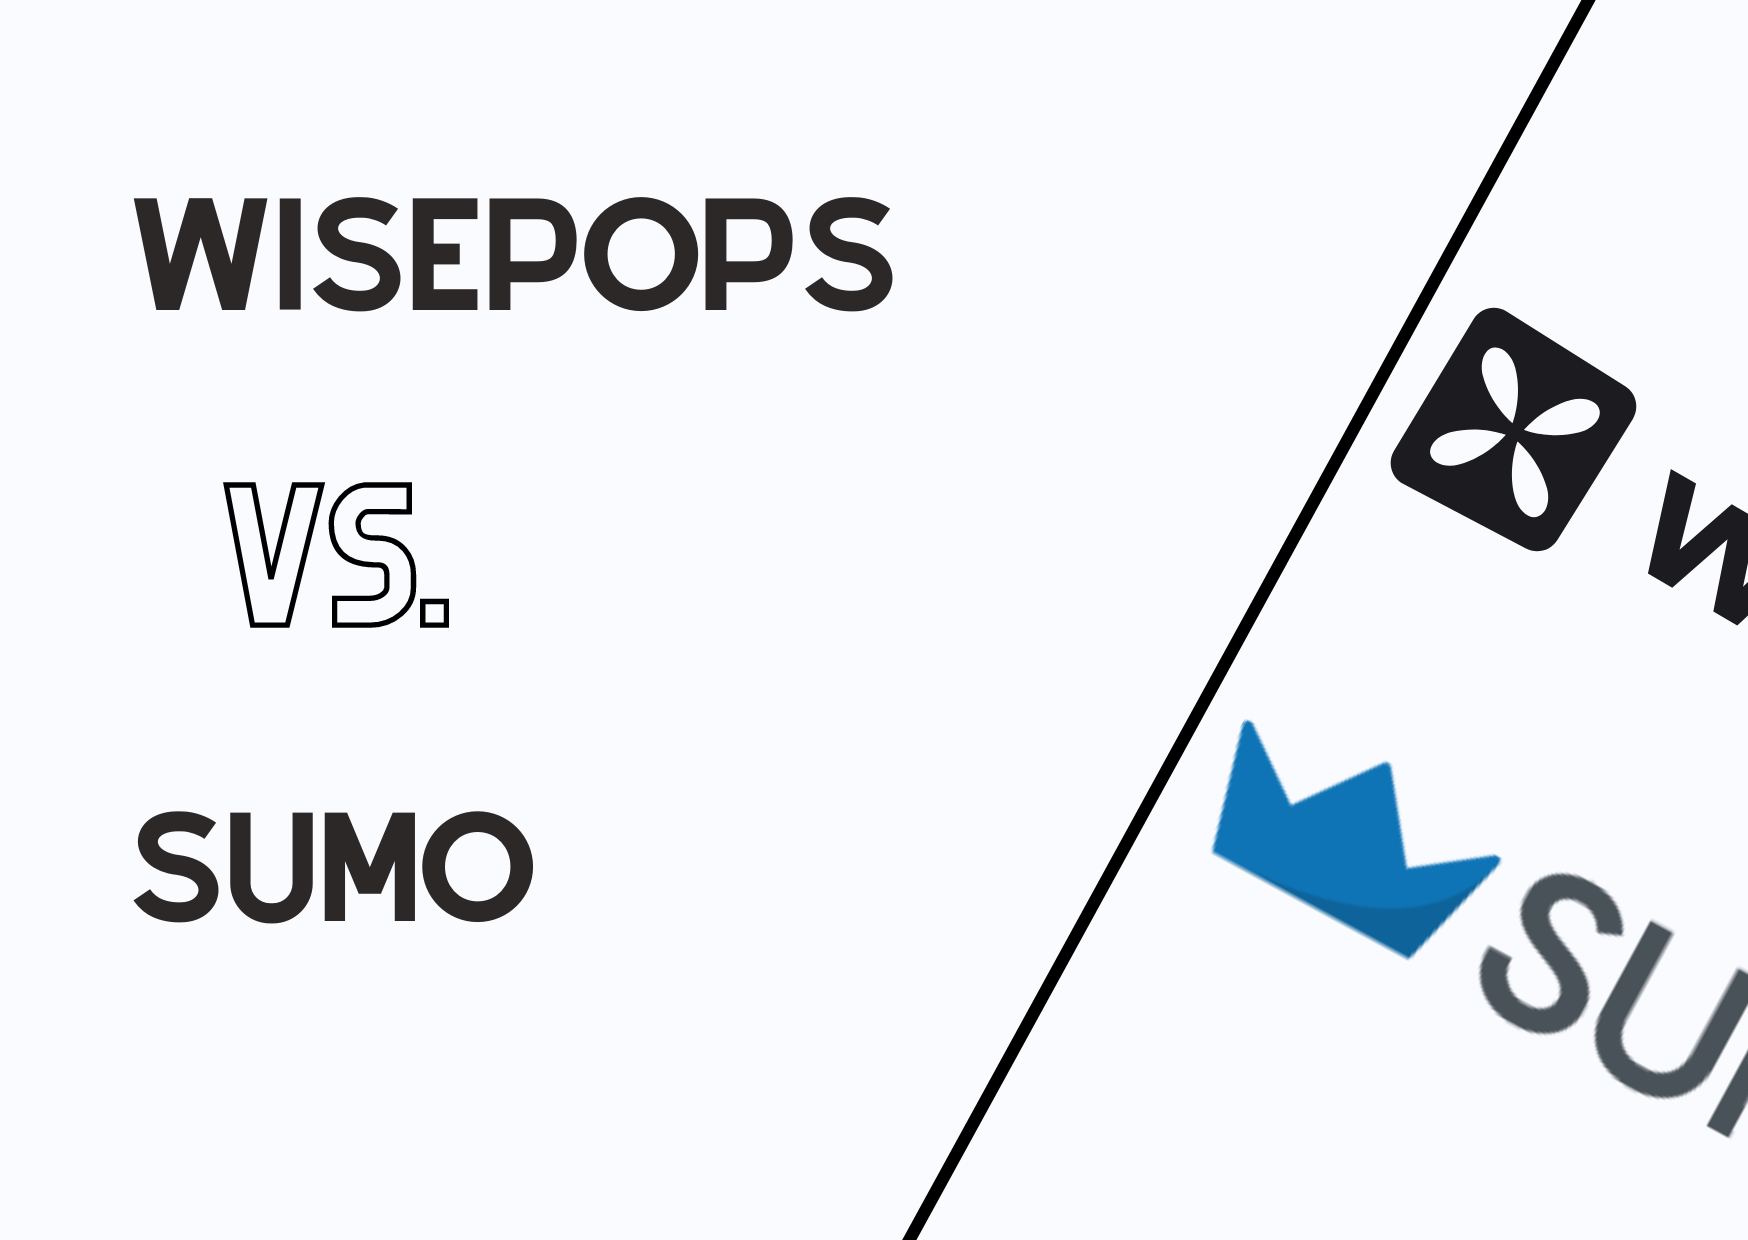 the banner to illustrate the comparison of Wisepops and Sumo